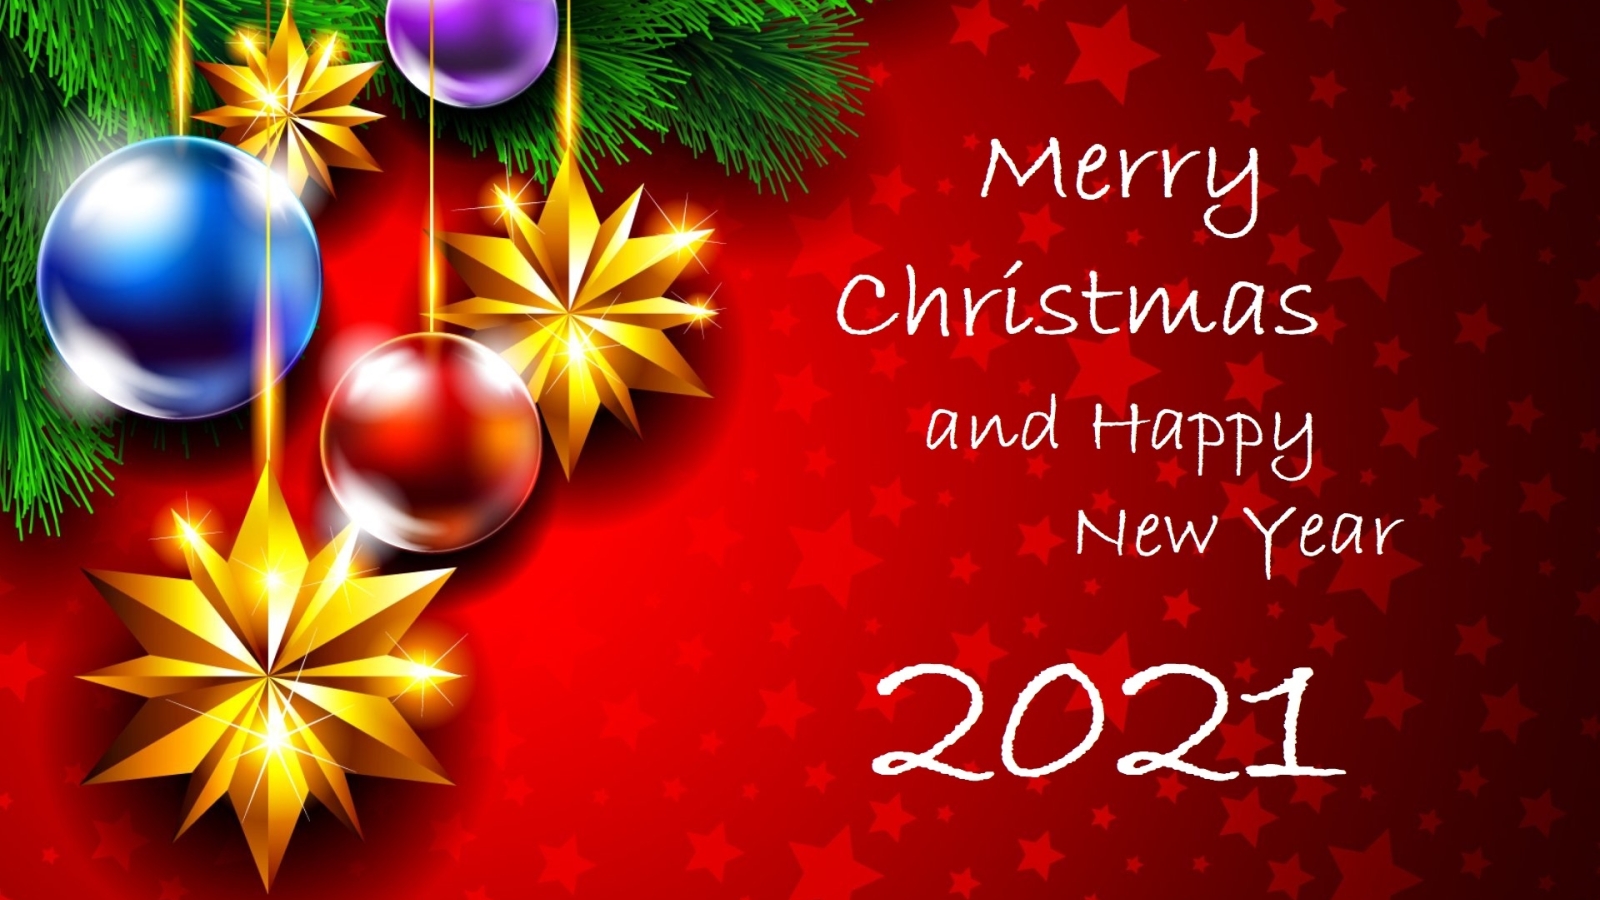 1600x900 Happy New Year Merry Christmas 2021 Greeting 1600x900 ...